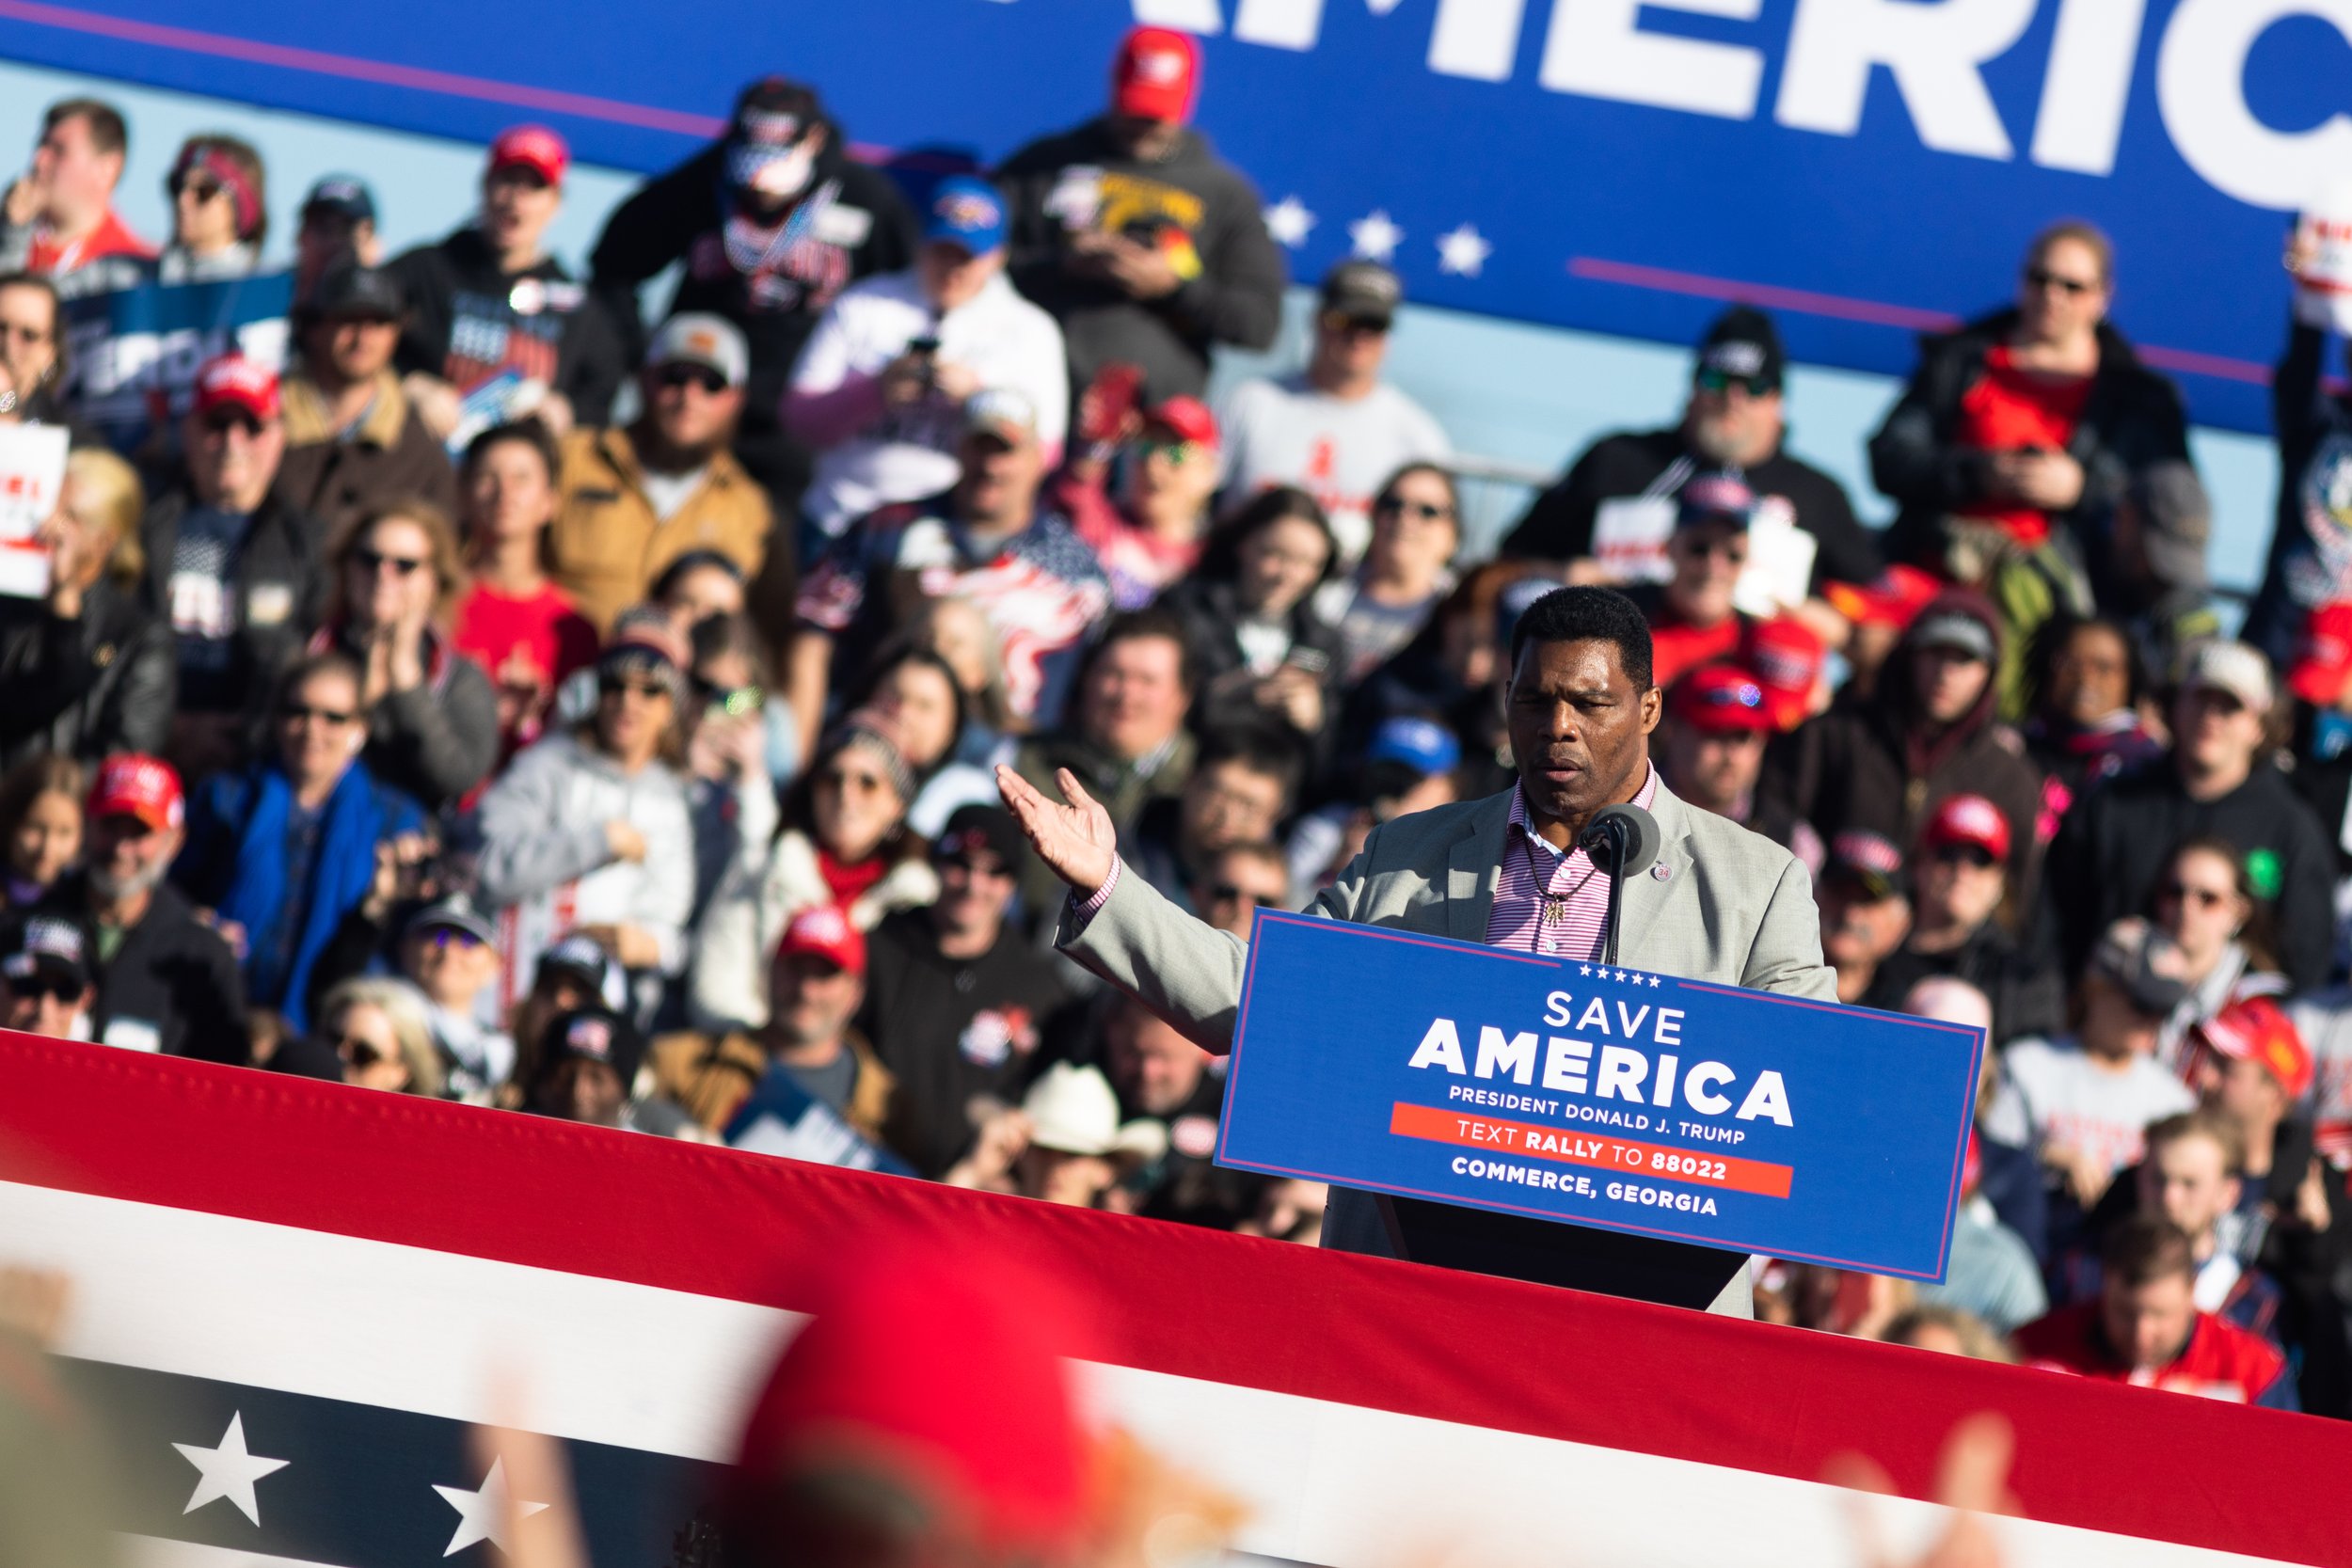  Former Georgia running back Herschel Walker speaks at a Save America rally at the Atlanta Dragway on Saturday, March 26, 2022 in Commerce, Georgia. Walker is a member of the 1980 Georgia Bulldogs football team that won the National Championship, and